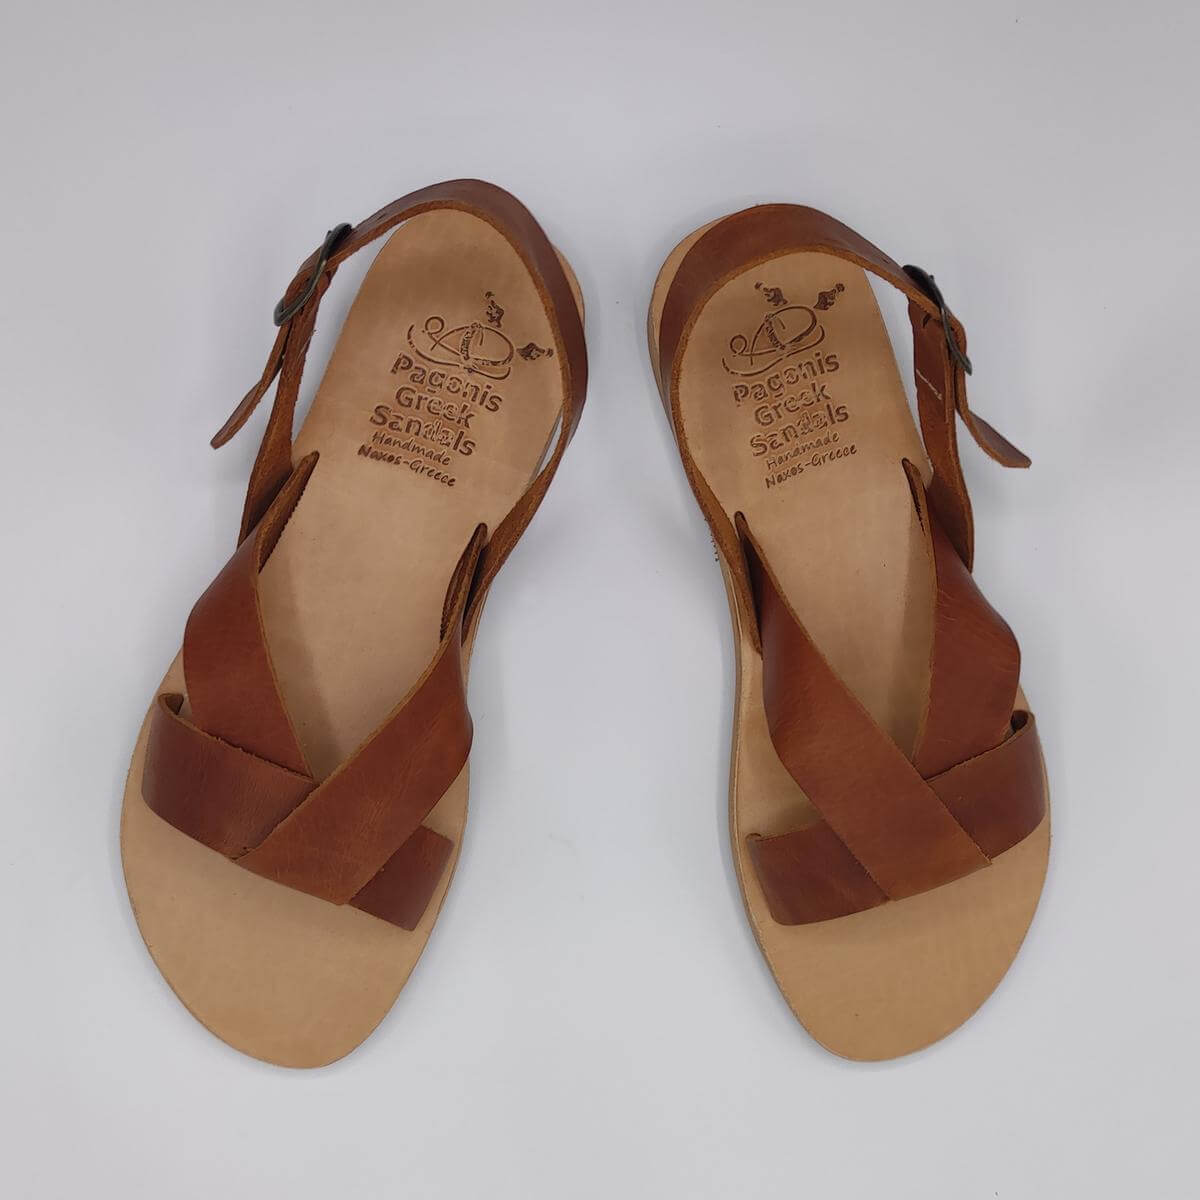 New Age Leather Sandal for Women Brown Color